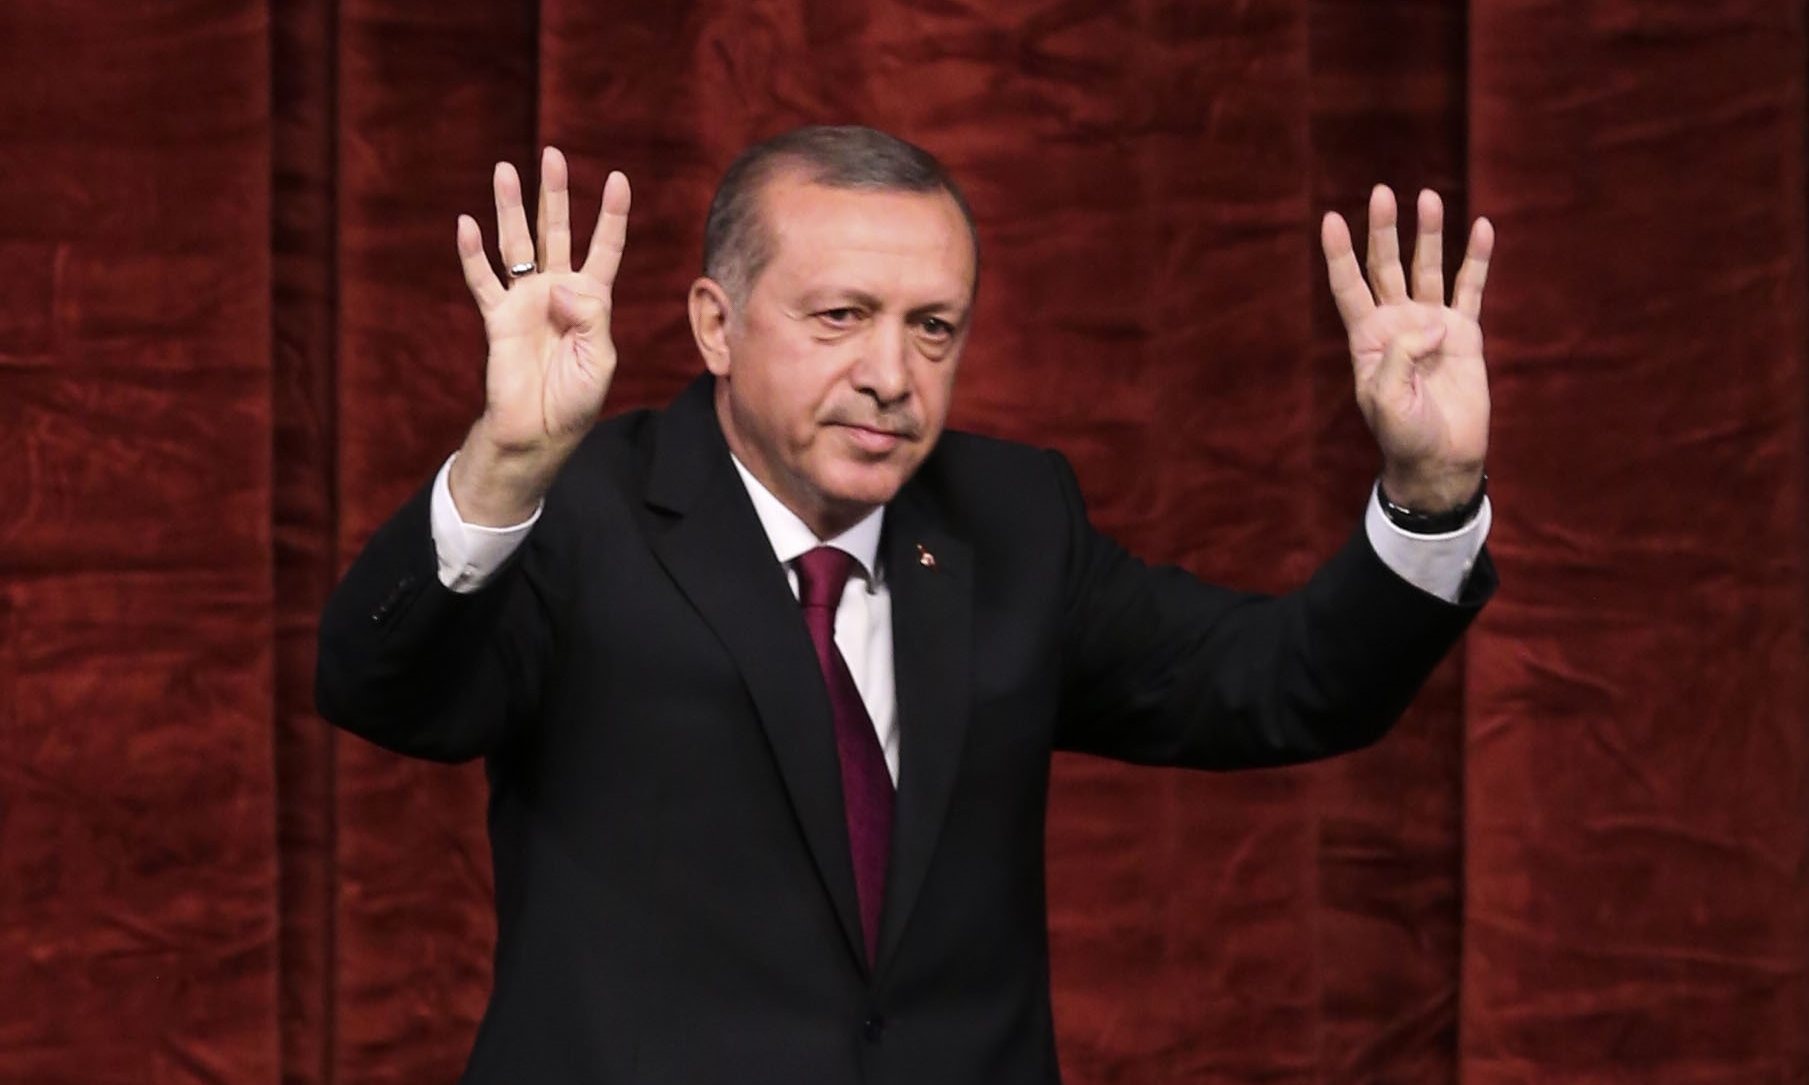 Turkish president Recep Tayyip Erdogan he will shut the country’s military academies. Photograph: Anadolu Agency/Getty Images